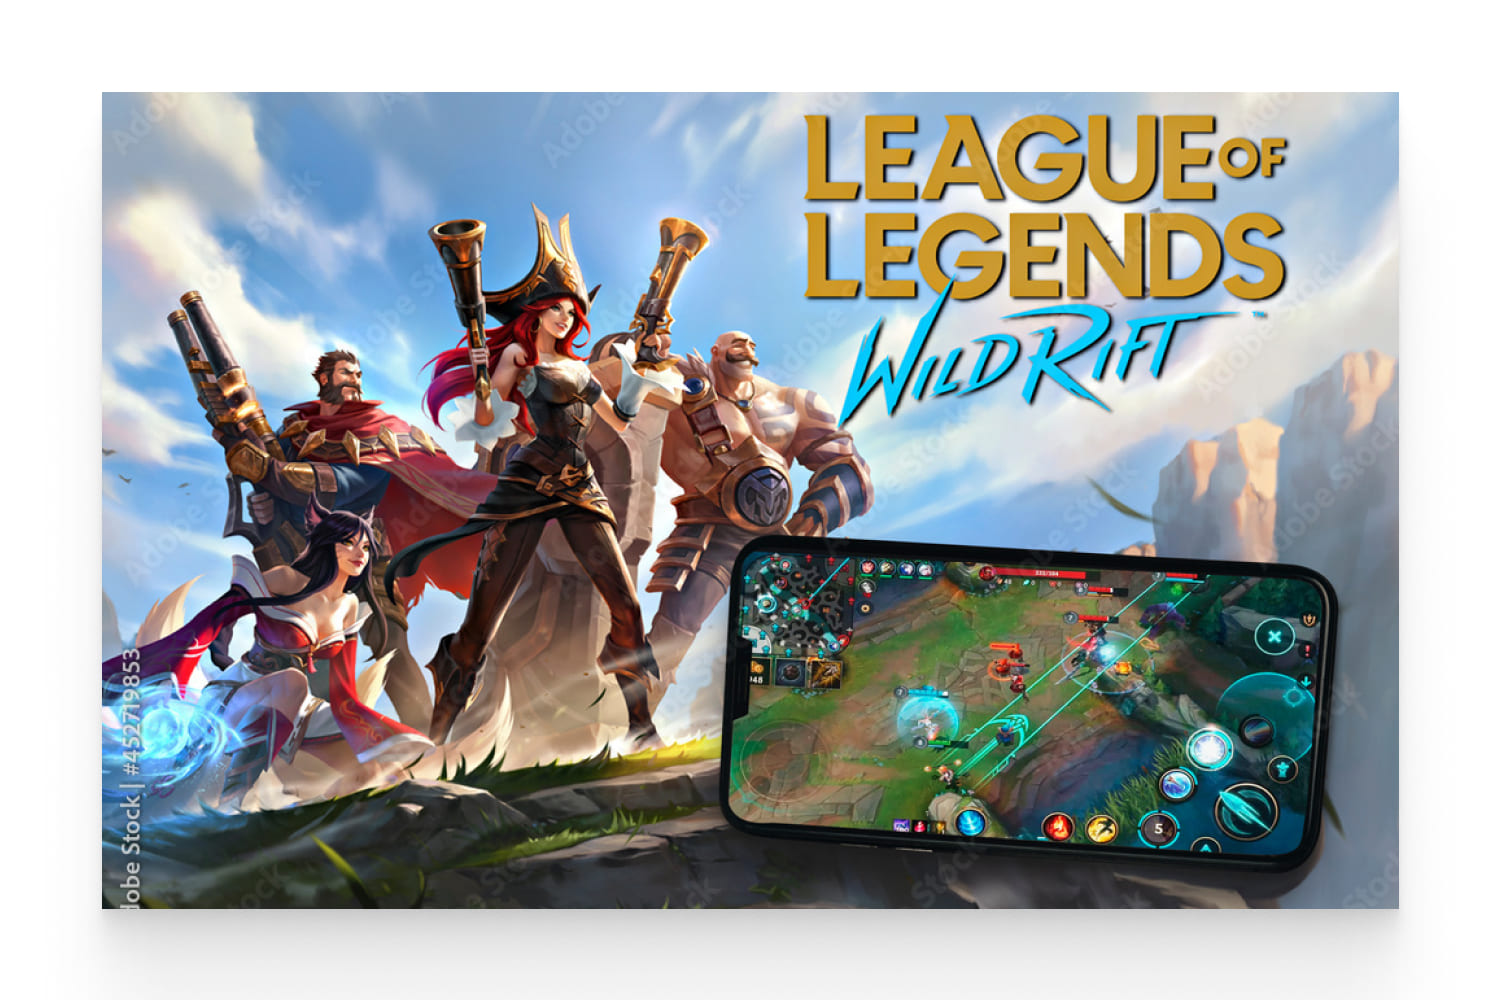 League of Legends Wild Rift game app on the smartphone screen in the background with game image.